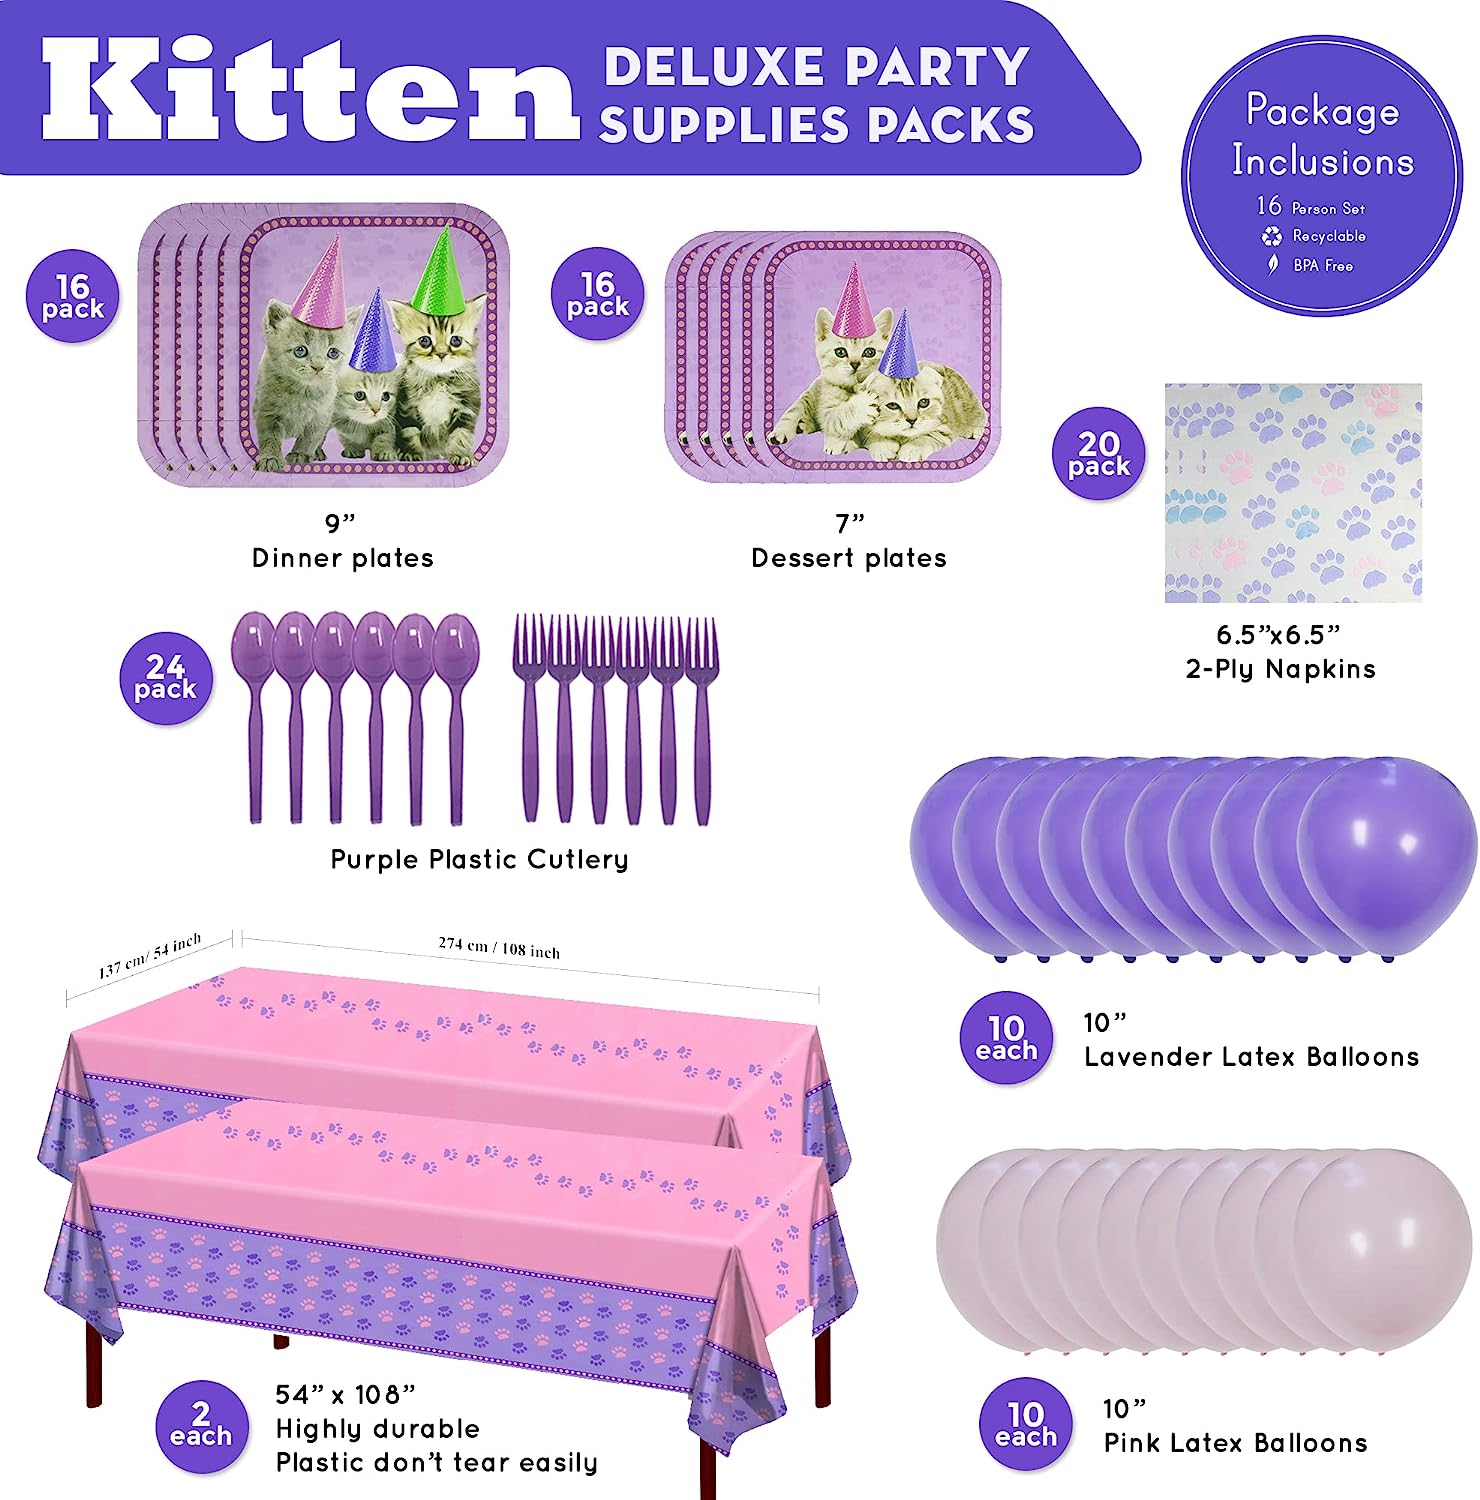 Our Kitten Deluxe Party Pack includes (16) 9-inch paper dinner plates, (16) 7-inch paper dessert plates, (20) paper lunch napkins, (2) 108"x54" Kitten Table Covers, (10) 10-inch Lavender Balloons, (10) 10-inch Pink Balloons, (24) Purple Plastic Spoons, and (24) Purple Plastic Forks.